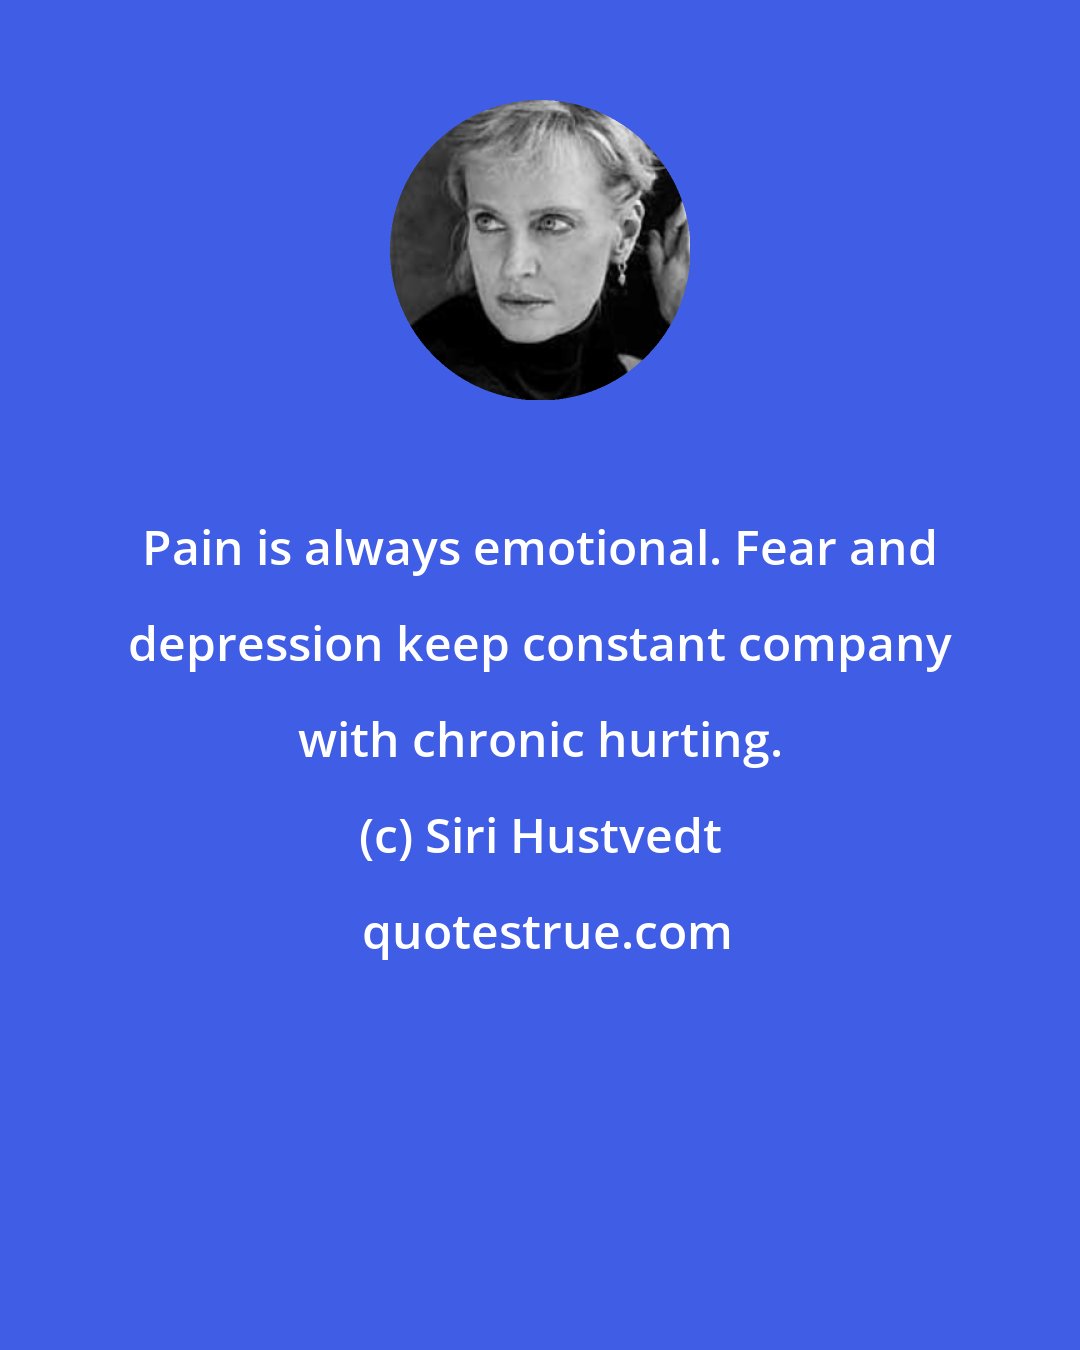 Siri Hustvedt: Pain is always emotional. Fear and depression keep constant company with chronic hurting.